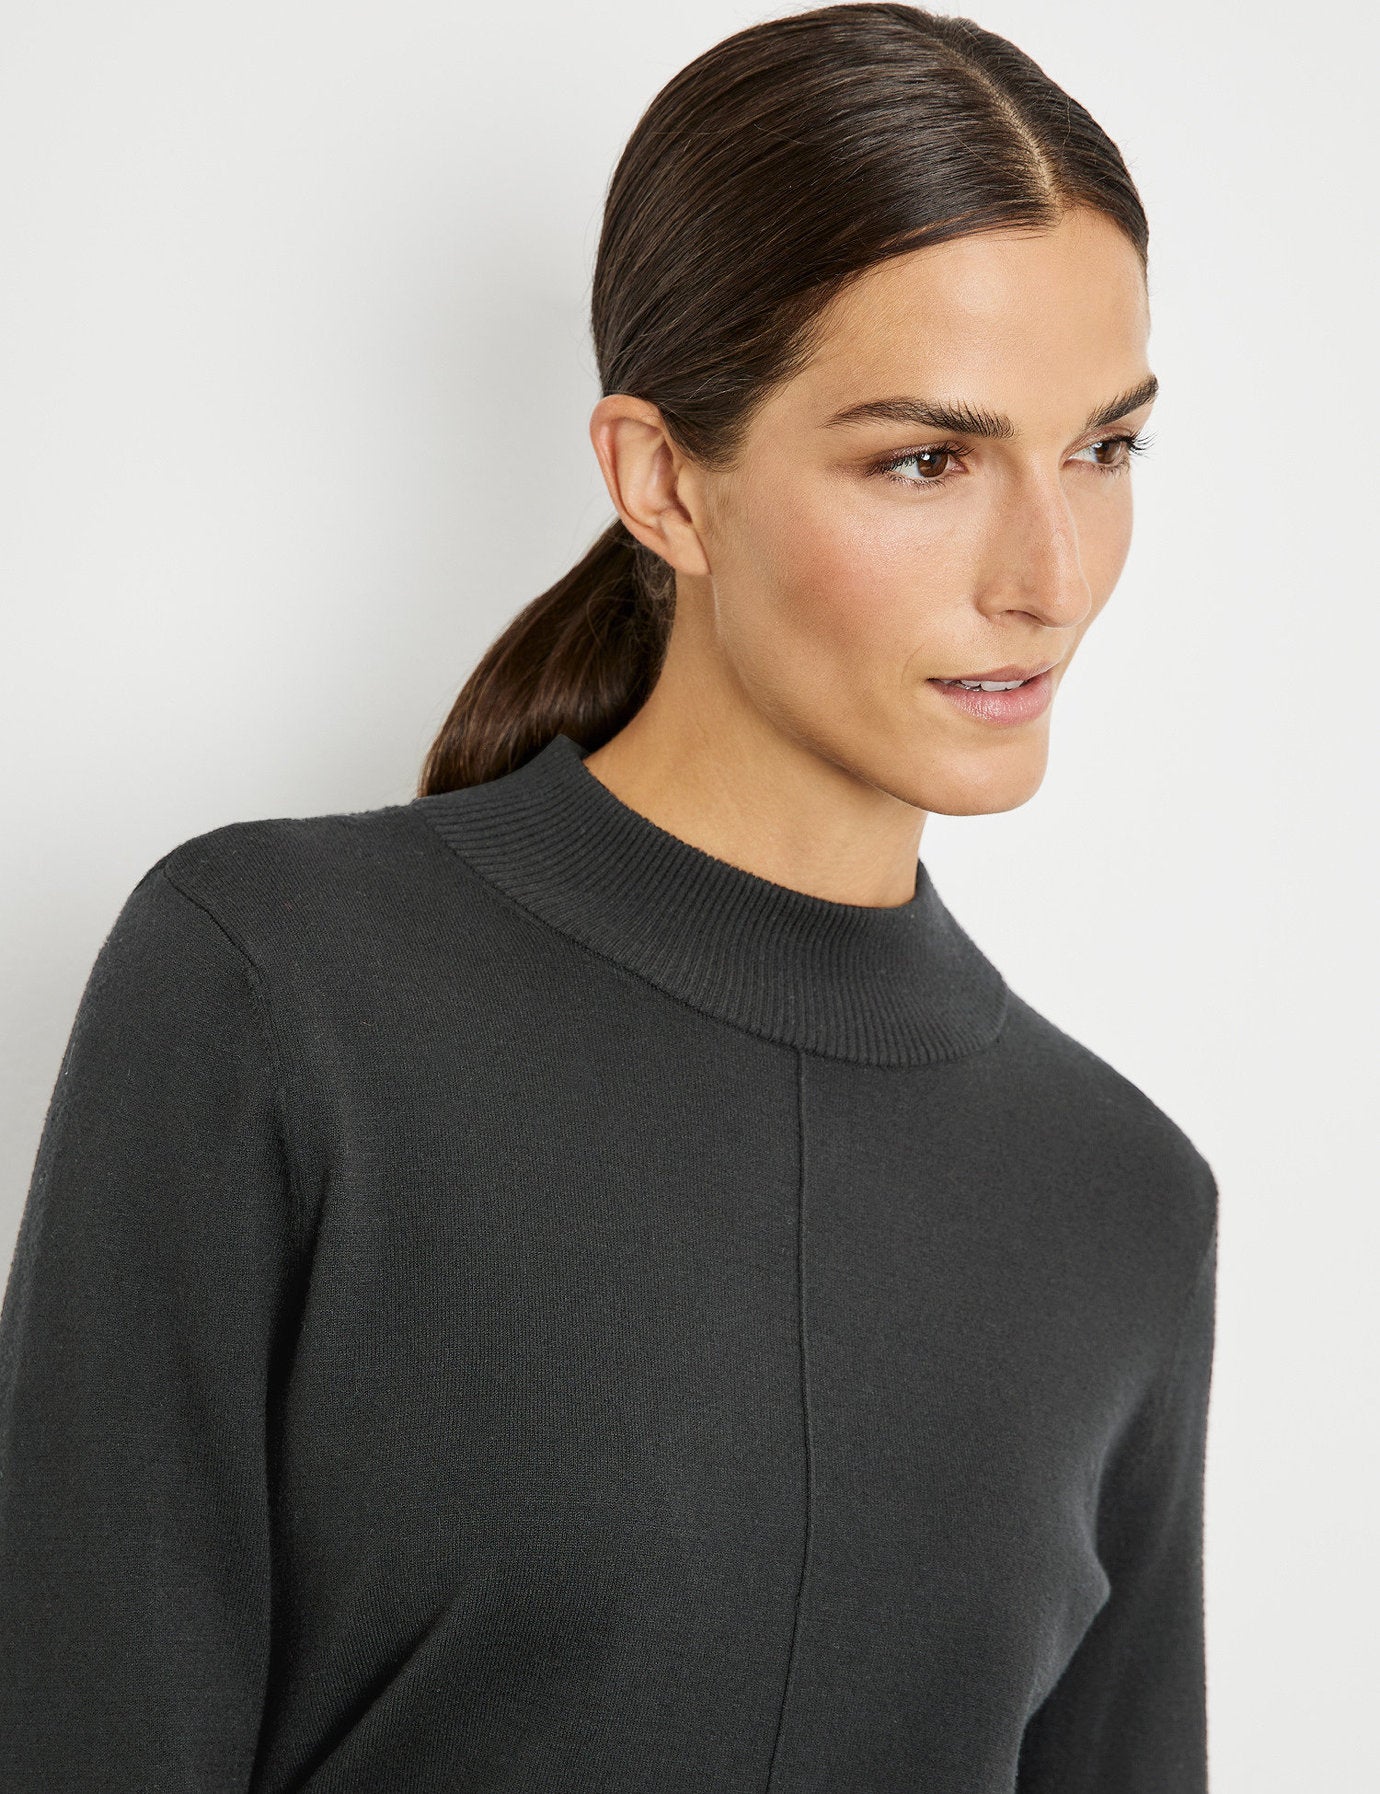 Jumper In A Knit Blend With An Elongated Back_170529-44723_11000_04